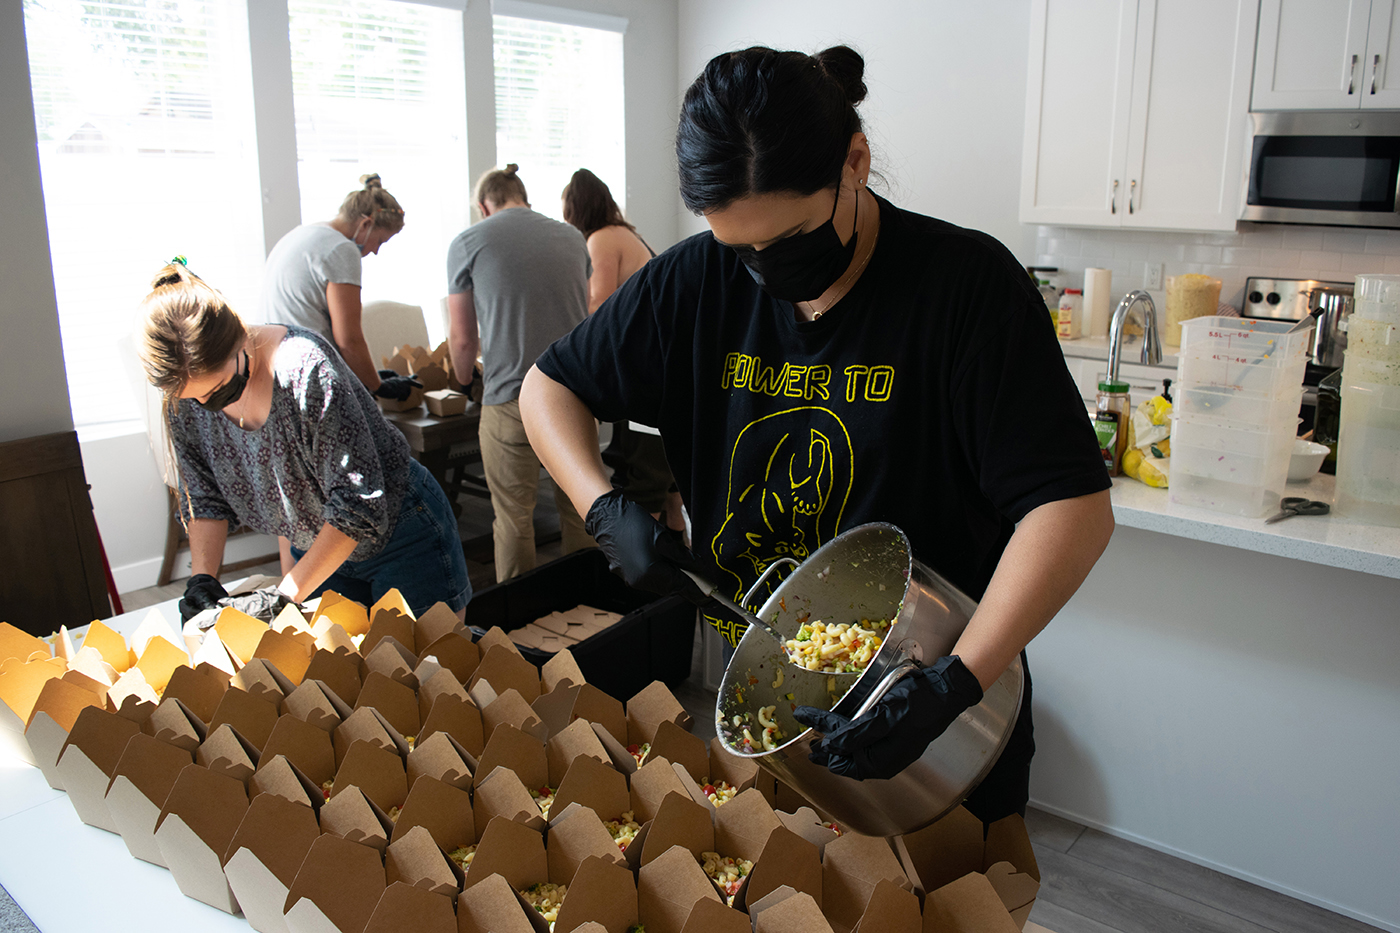 Food Justice Coalition Founder Jeanette Padilla and FJC volunteers prepare plant-based meals for unsheltered citizens of SLC.